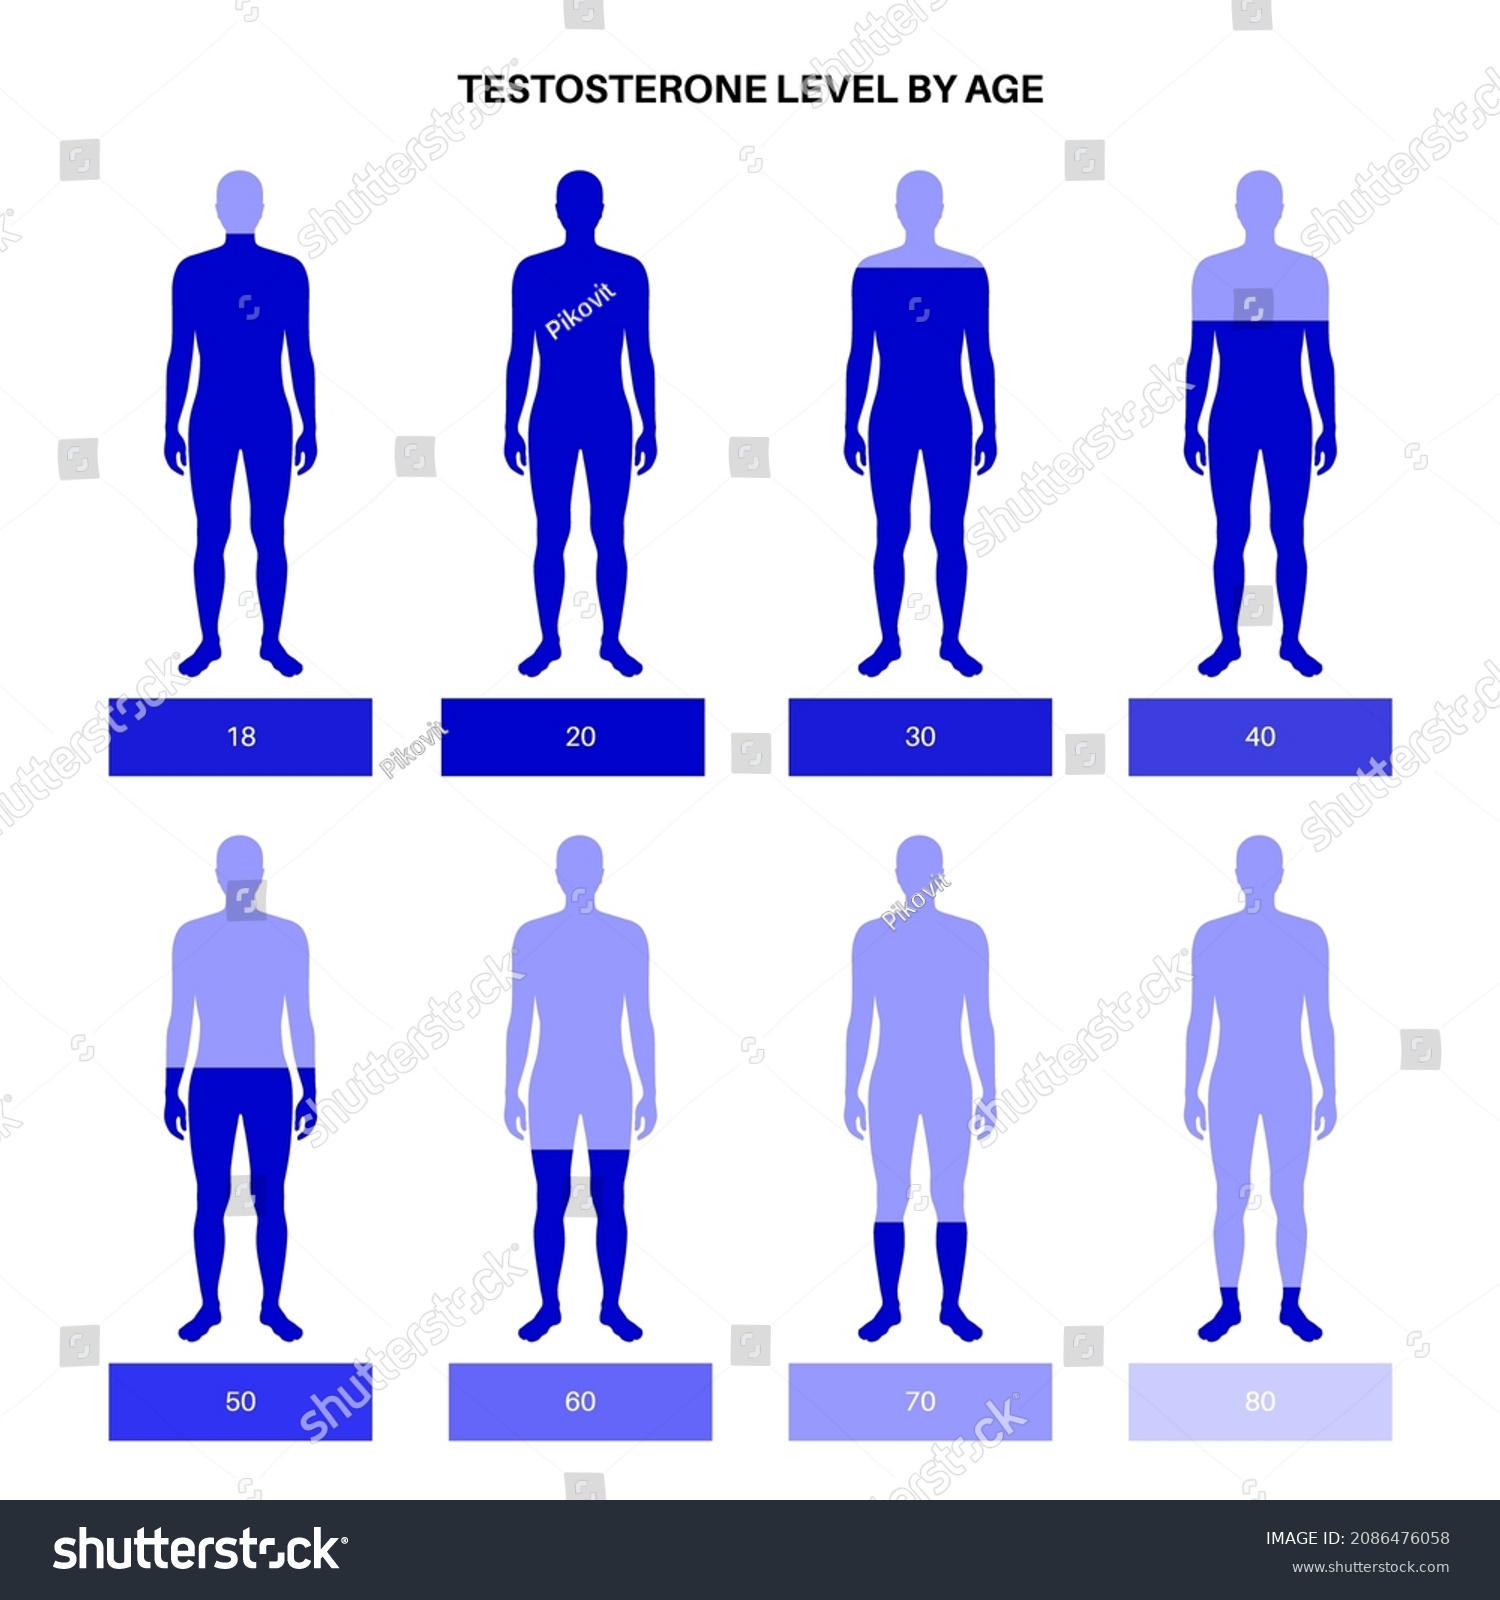 Testosterone Level Color Chart Sex Hormone Stock Vector Royalty Free 2086476058 1623